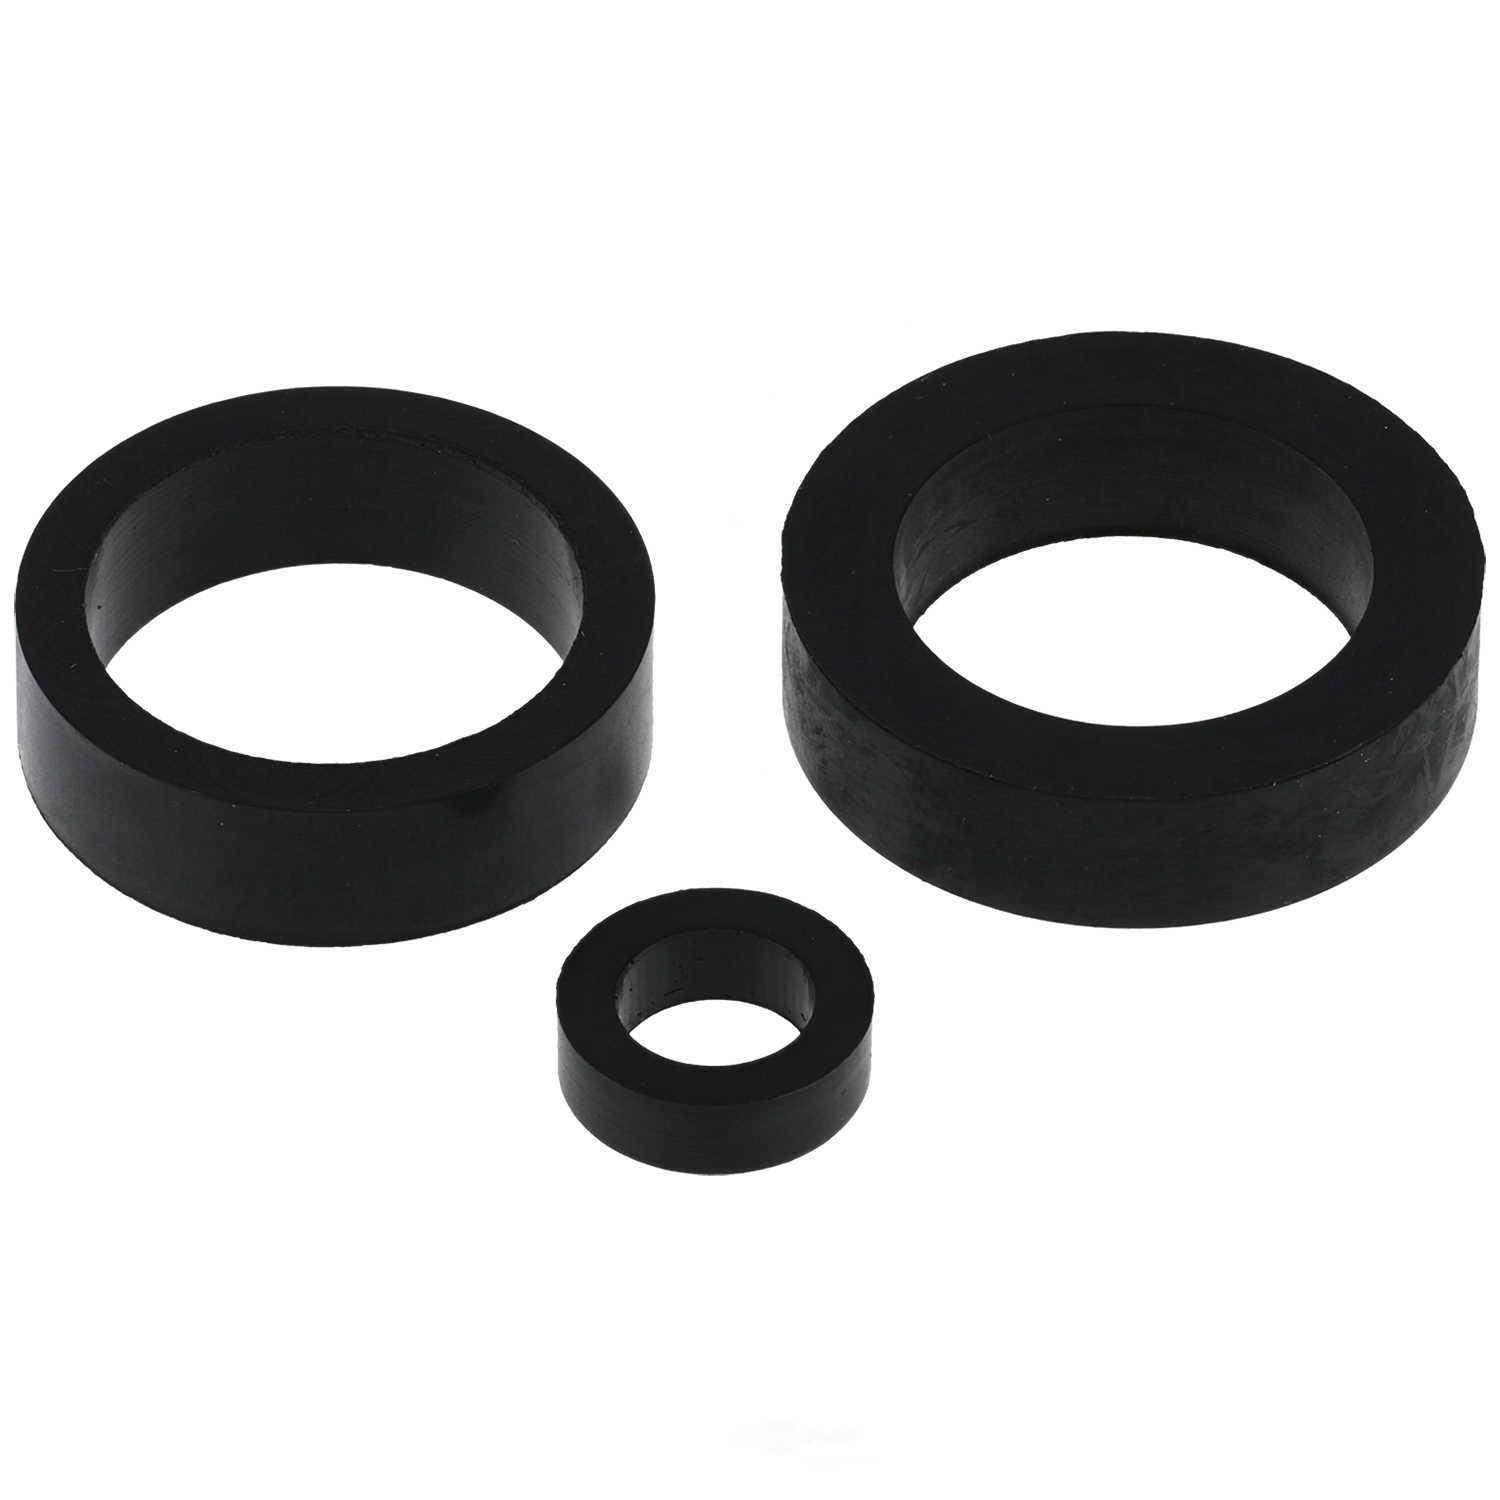 GB REMANUFACTURING INC. - Fuel Injector Seal Kit - GBR 8-010